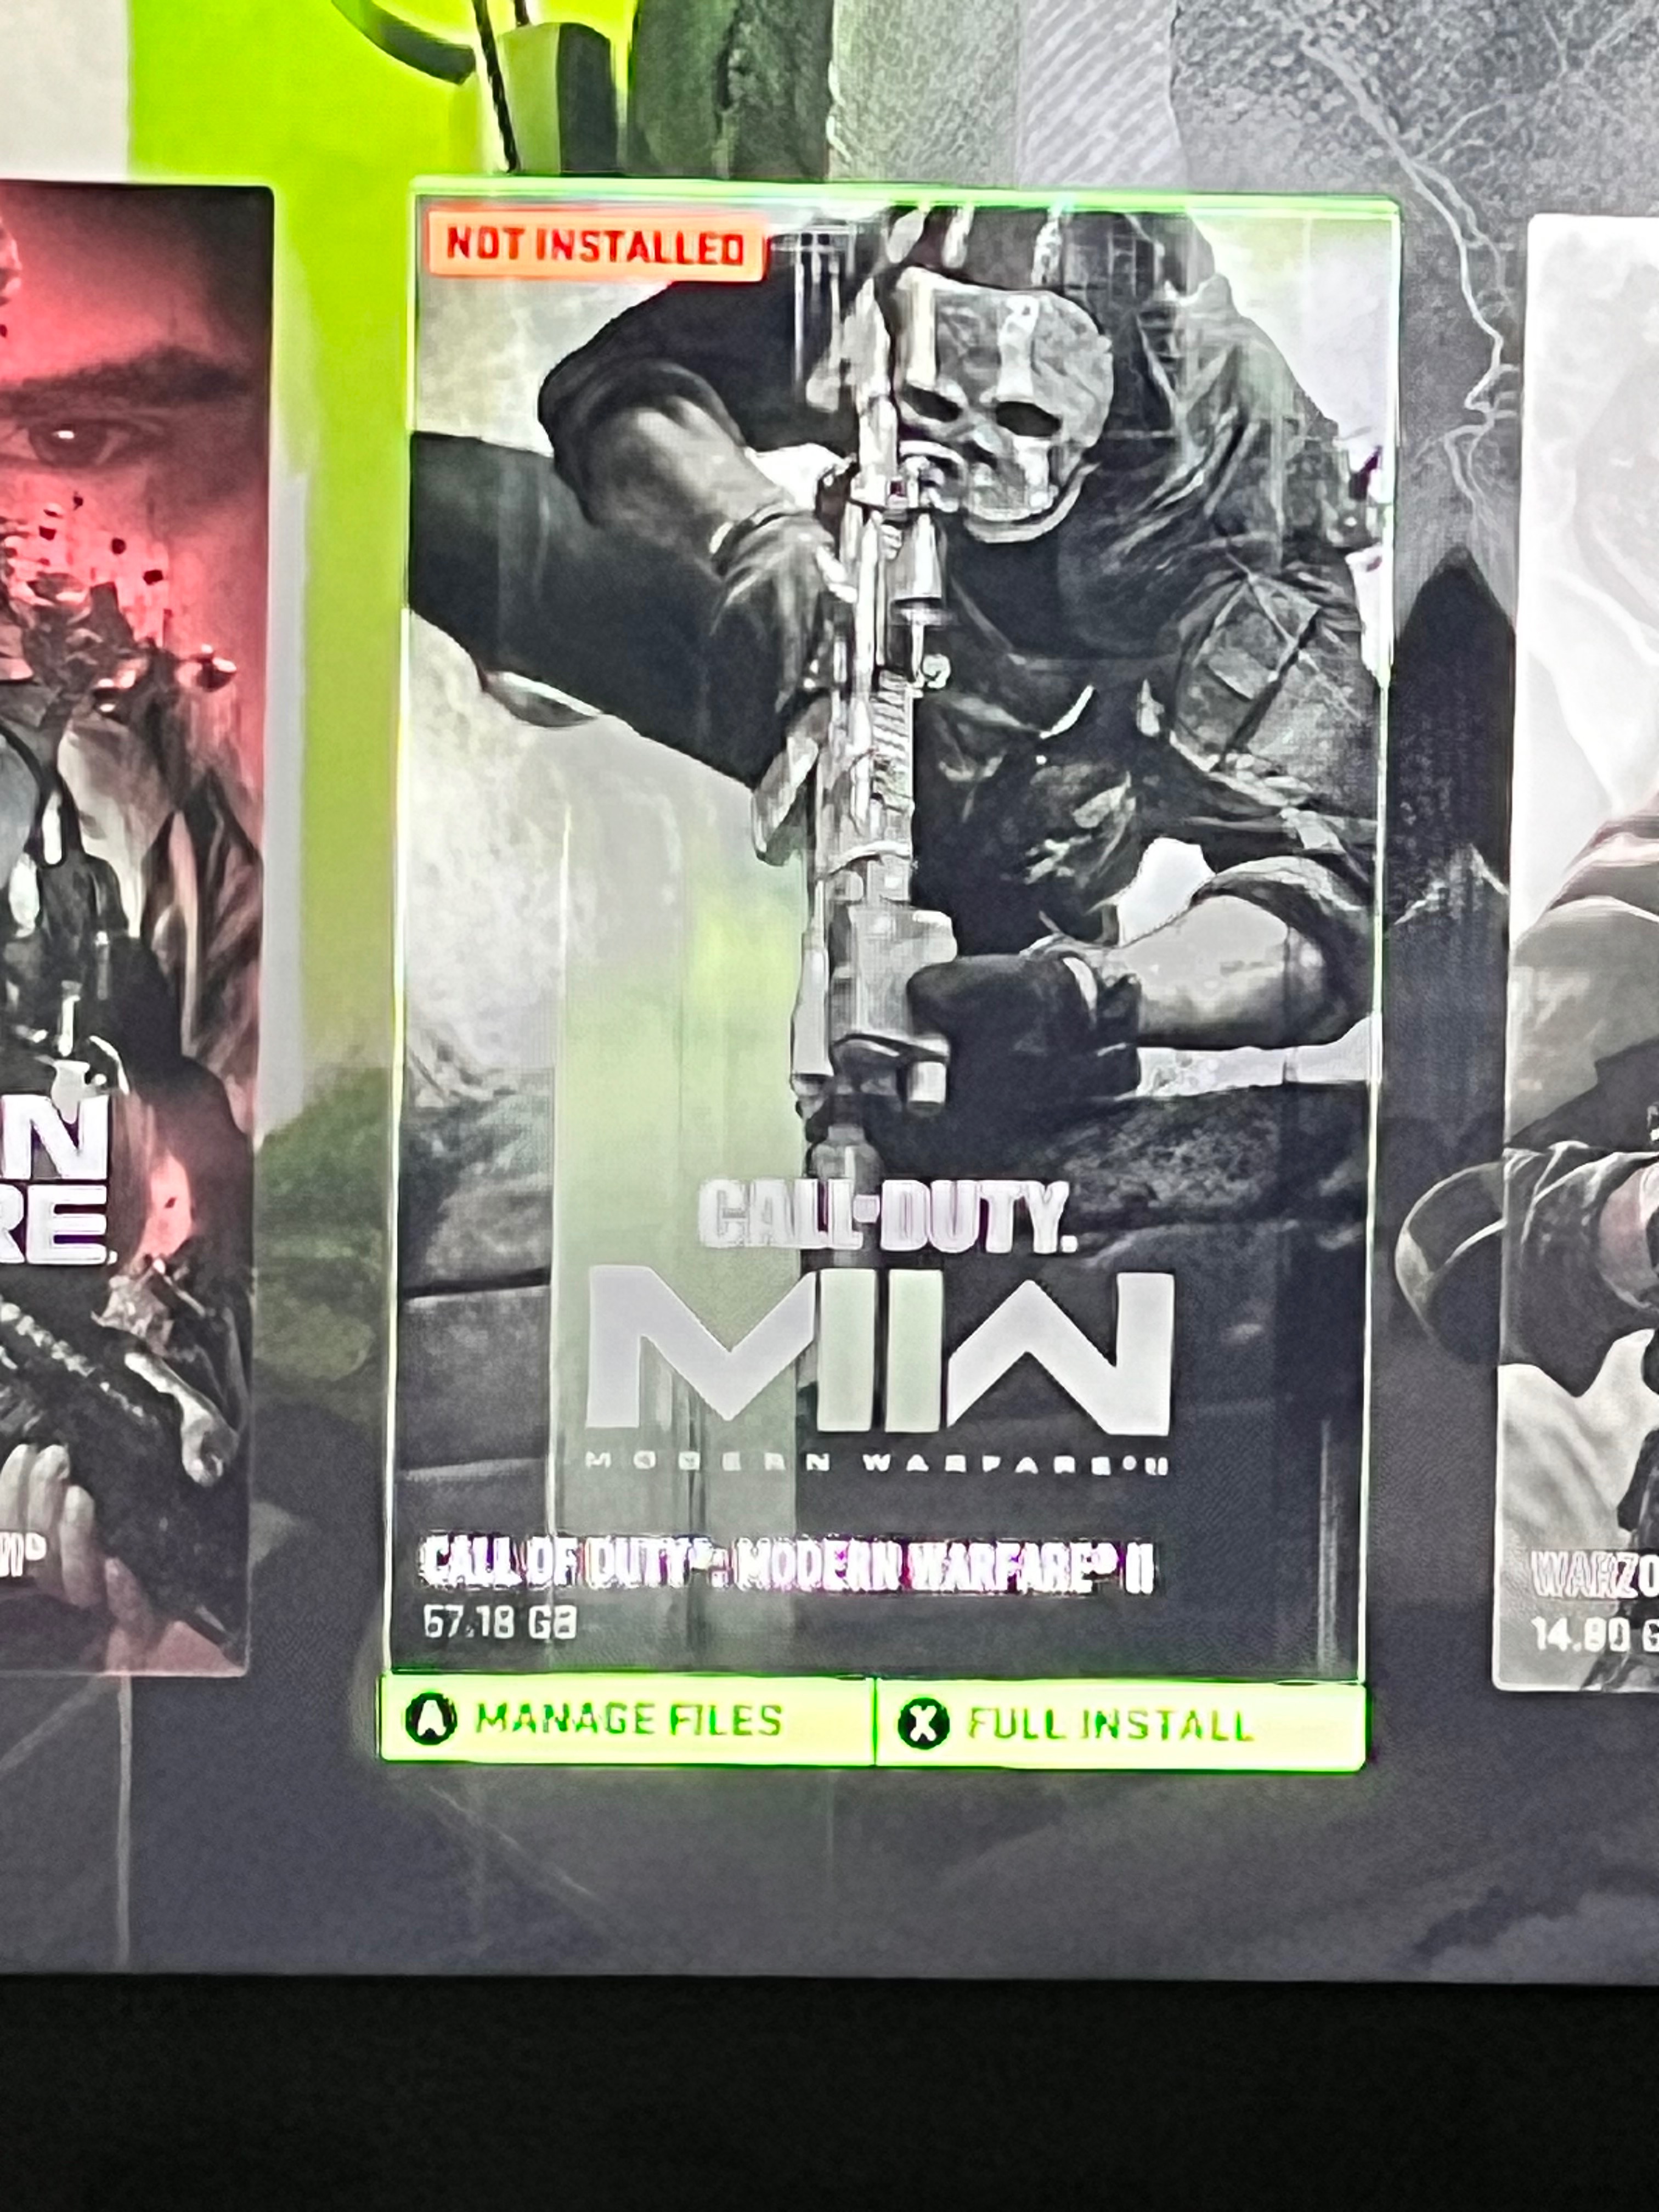 Since downloading the new mw3 my mw2 has gone and won’t install [​IMG]